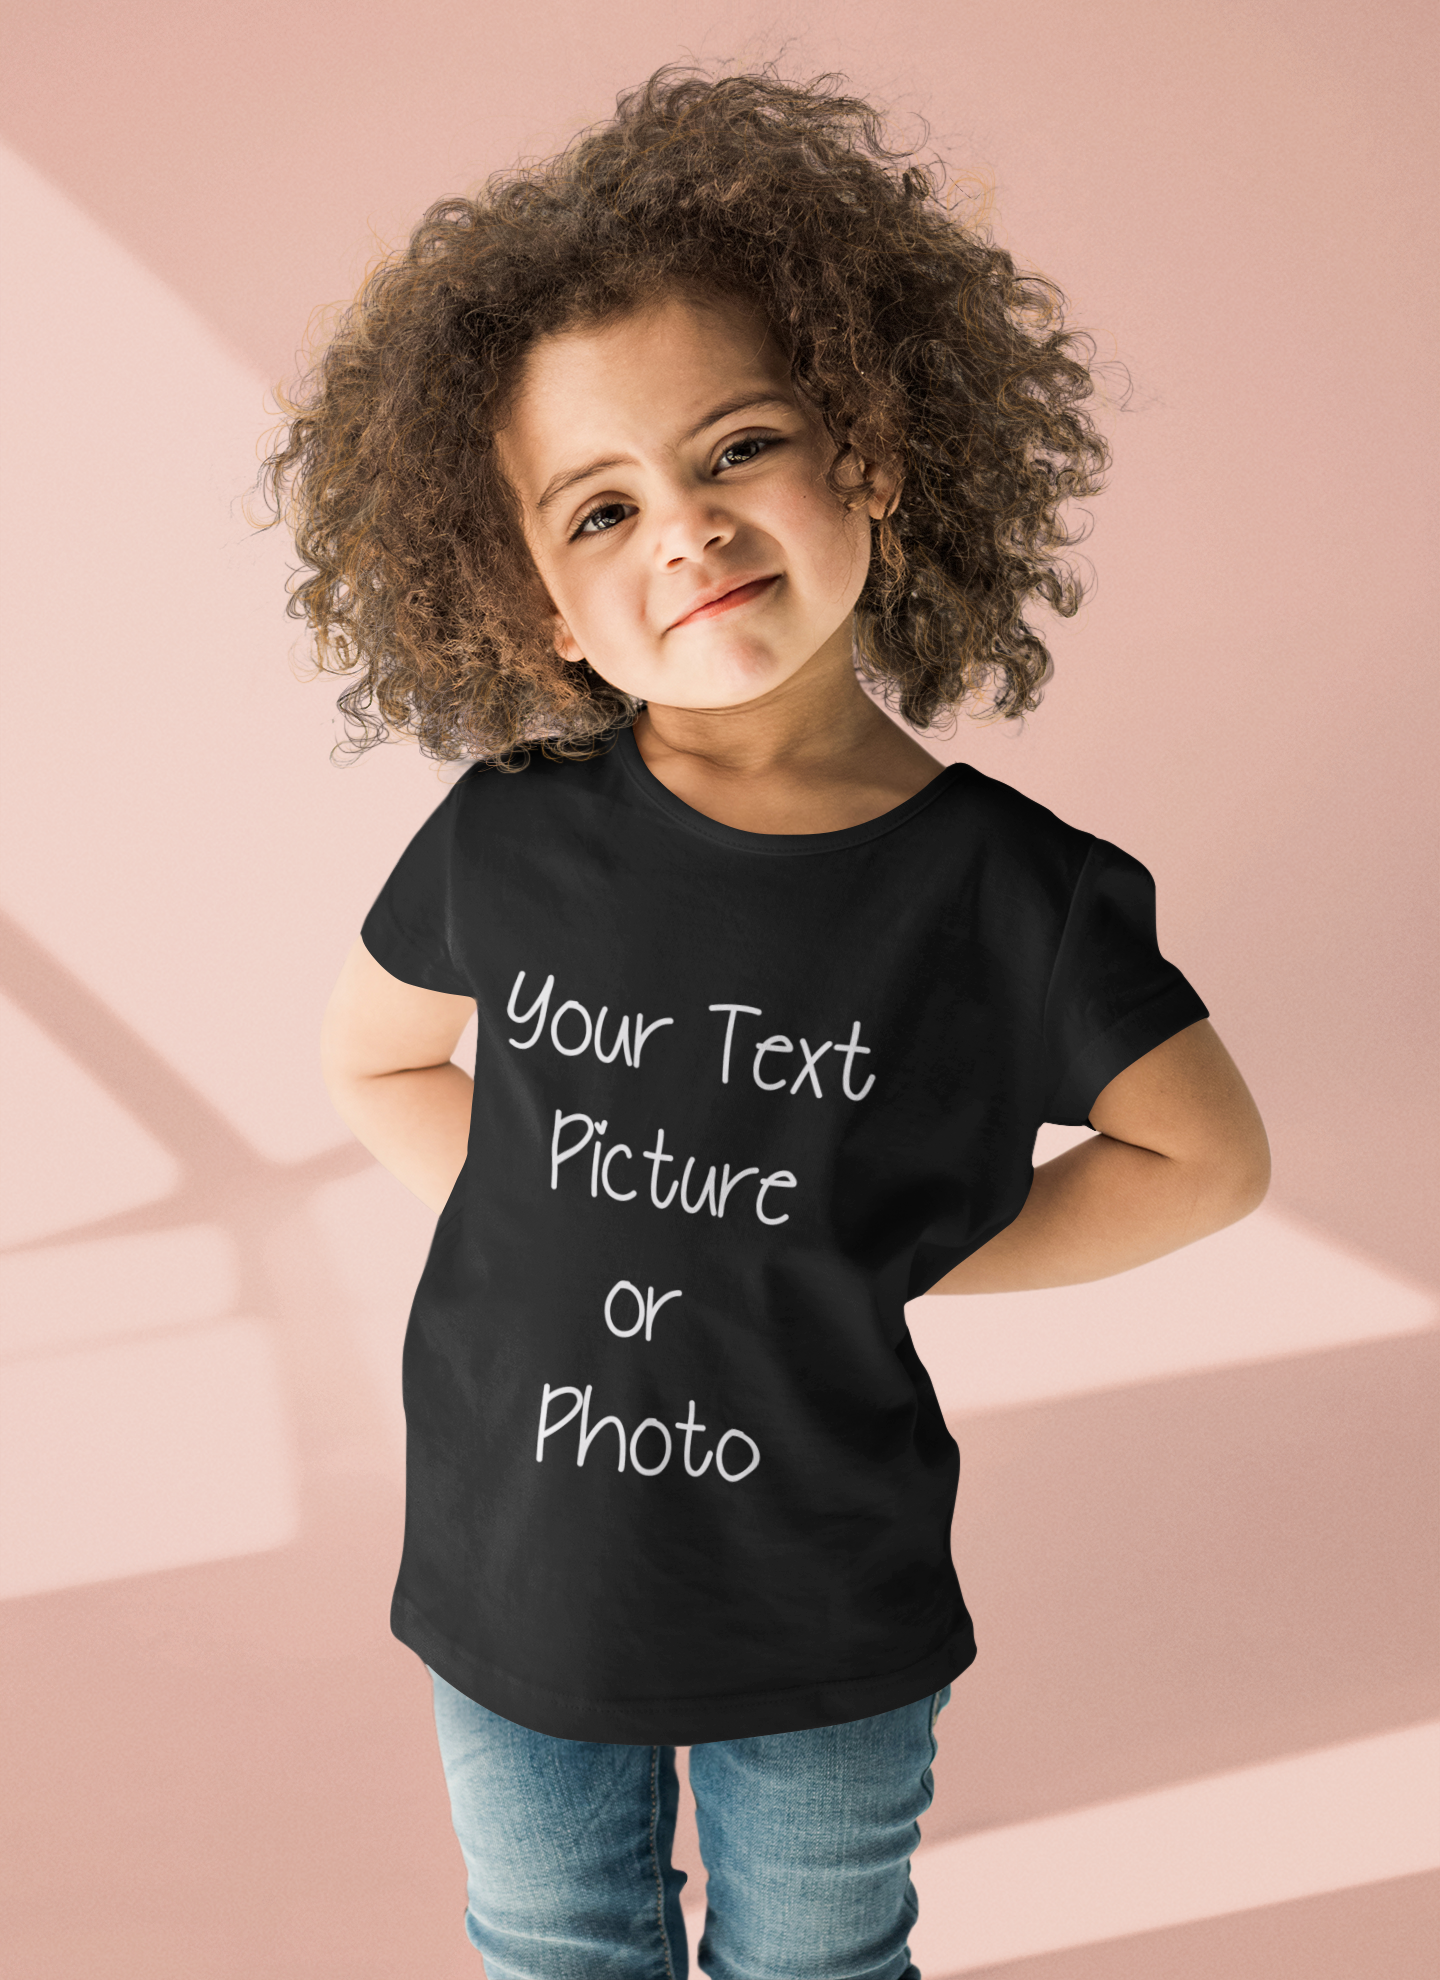 Personalised Kids – Our Print Shop